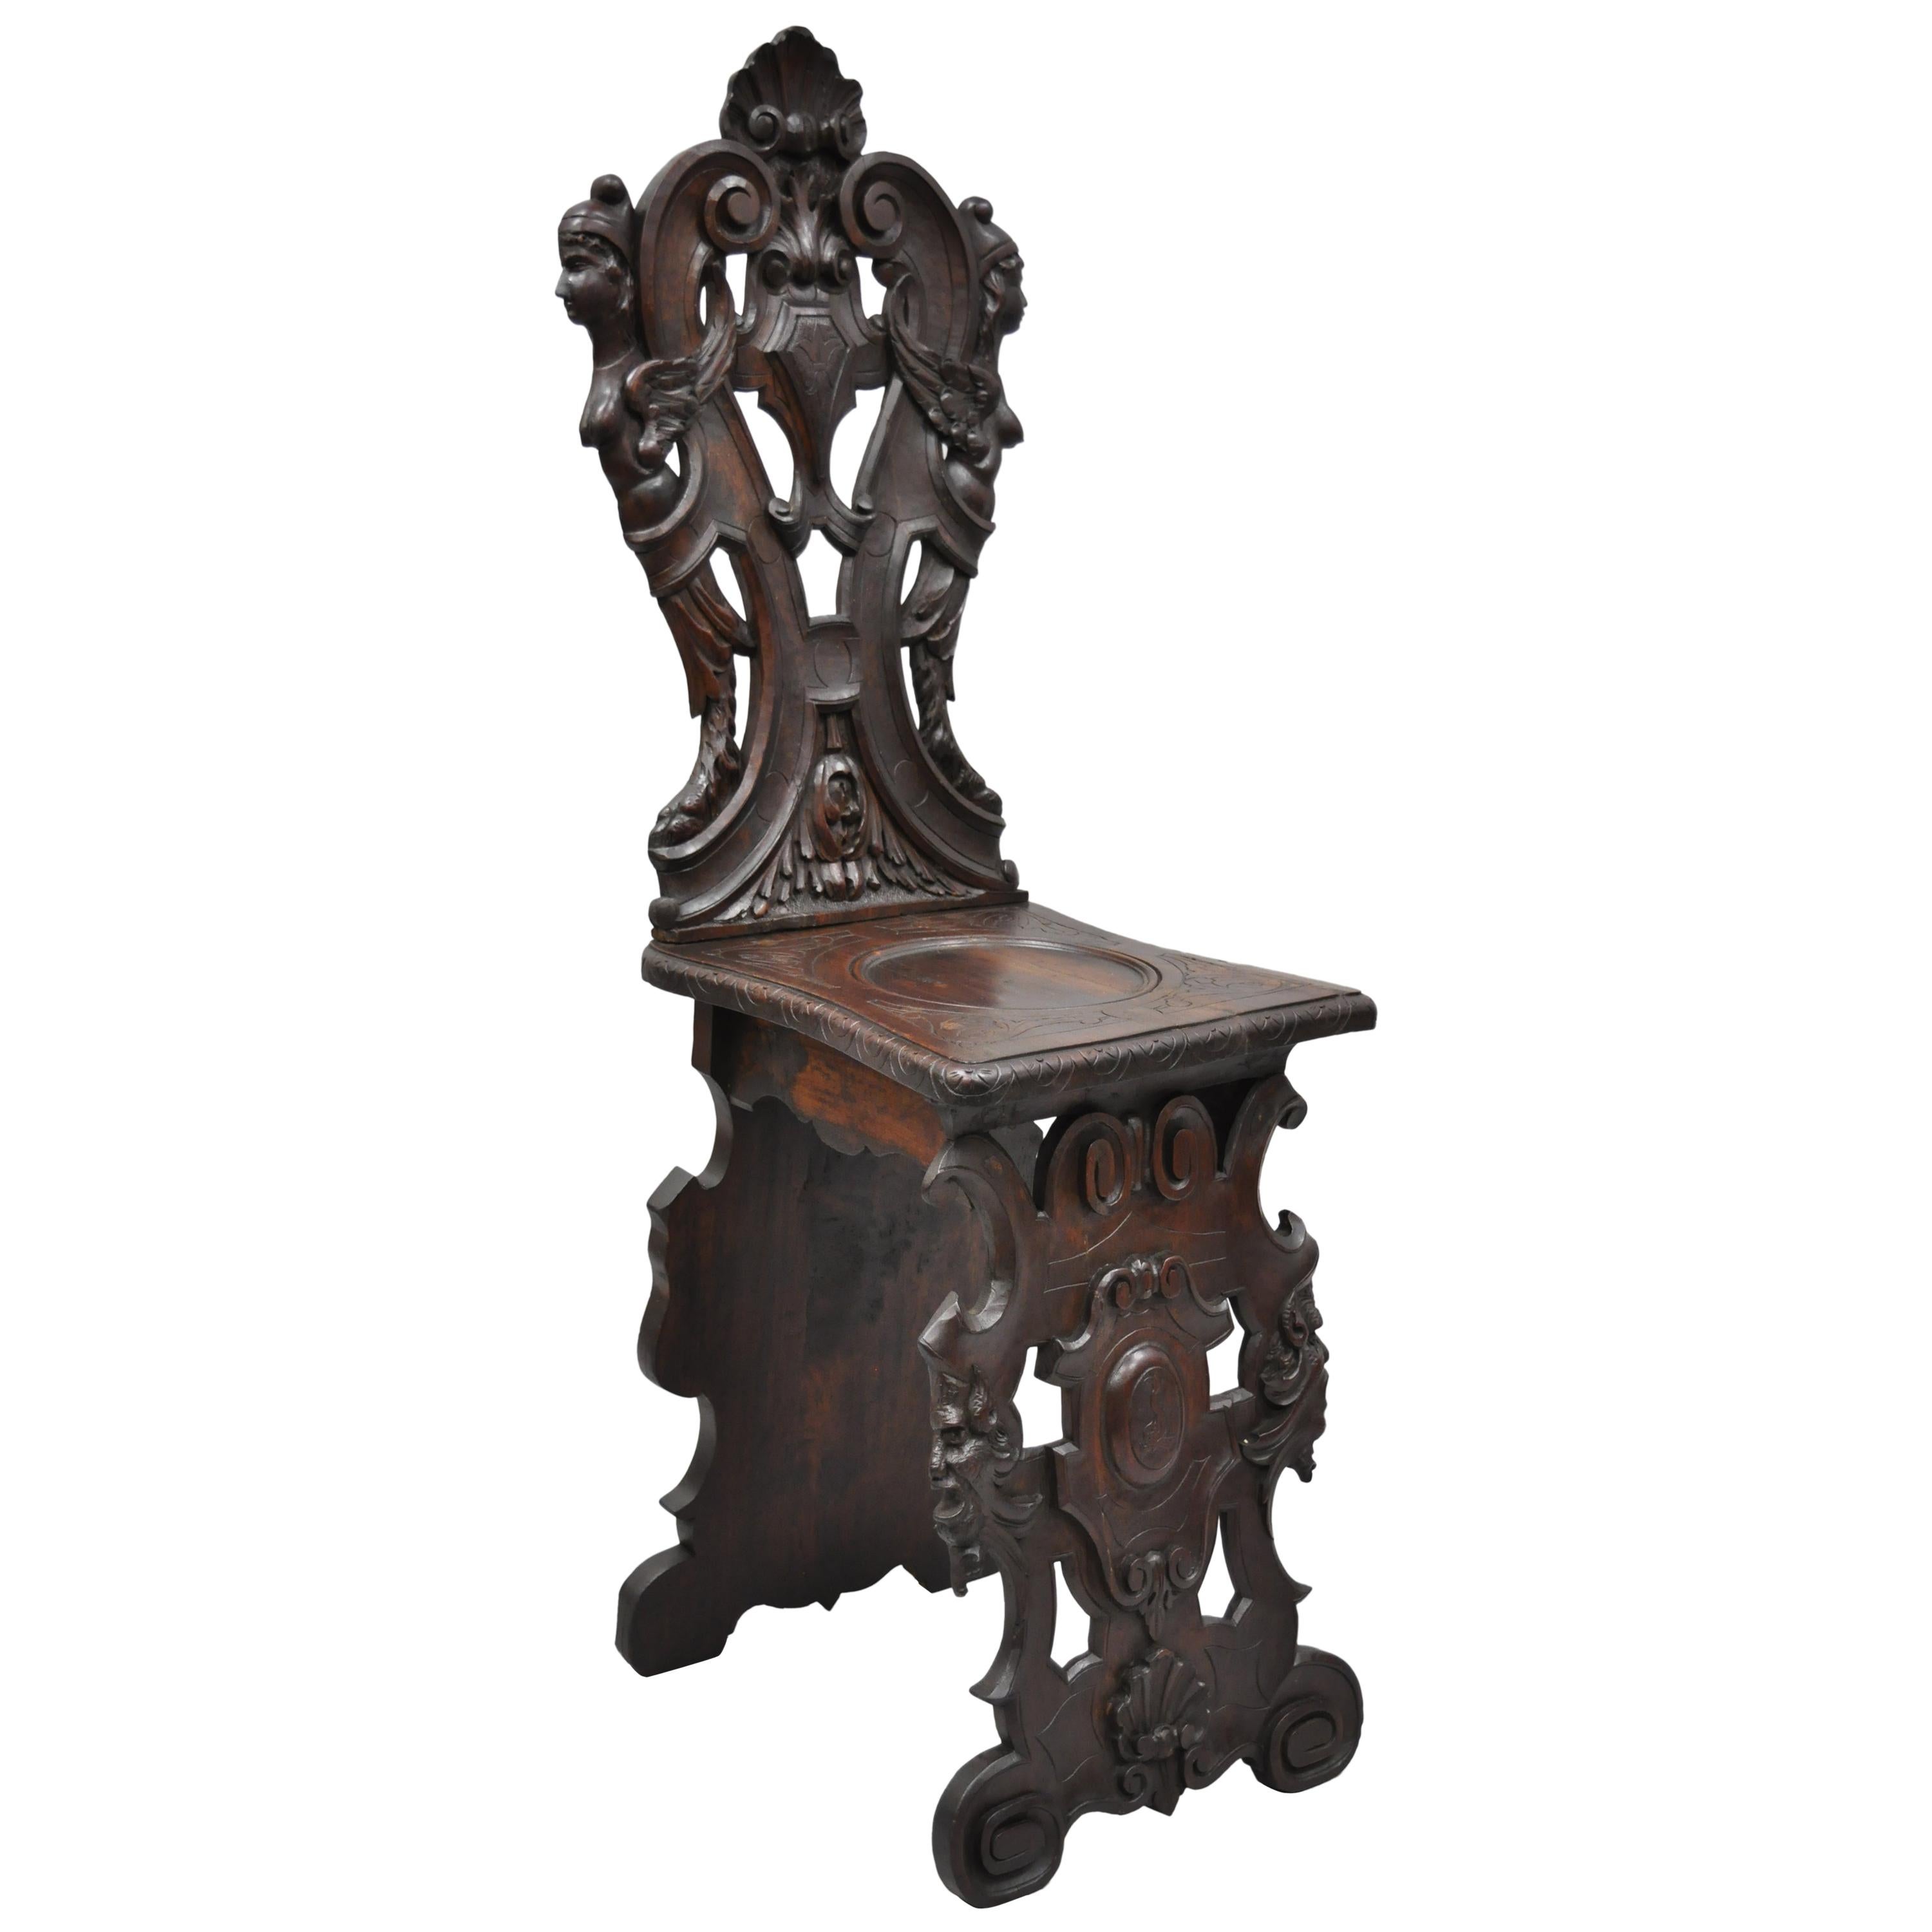 19th Century Italian Carved Walnut Figural Sgabello Chair with Winged Maidens